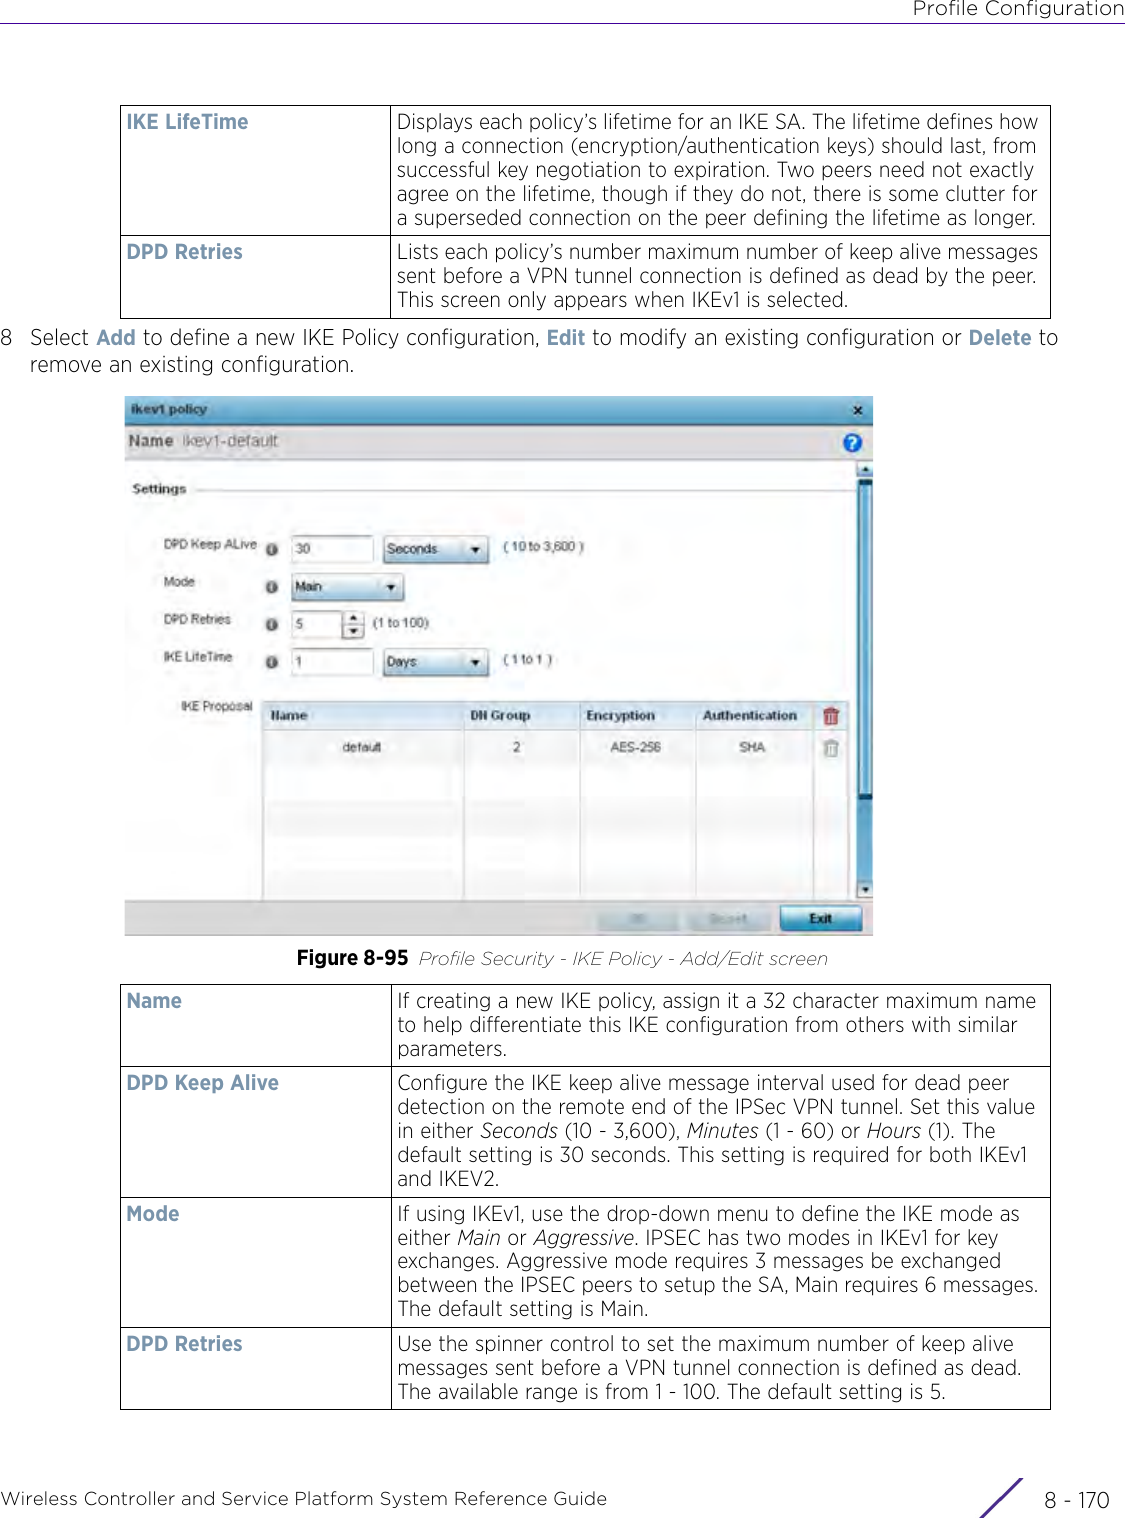 Profile ConfigurationWireless Controller and Service Platform System Reference Guide  8 - 1708Select Add to define a new IKE Policy configuration, Edit to modify an existing configuration or Delete to remove an existing configuration.Figure 8-95 Profile Security - IKE Policy - Add/Edit screenIKE LifeTime Displays each policy’s lifetime for an IKE SA. The lifetime defines how long a connection (encryption/authentication keys) should last, from successful key negotiation to expiration. Two peers need not exactly agree on the lifetime, though if they do not, there is some clutter for a superseded connection on the peer defining the lifetime as longer.DPD Retries Lists each policy’s number maximum number of keep alive messages sent before a VPN tunnel connection is defined as dead by the peer. This screen only appears when IKEv1 is selected.Name If creating a new IKE policy, assign it a 32 character maximum name to help differentiate this IKE configuration from others with similar parameters.DPD Keep Alive Configure the IKE keep alive message interval used for dead peer detection on the remote end of the IPSec VPN tunnel. Set this value in either Seconds (10 - 3,600), Minutes (1 - 60) or Hours (1). The default setting is 30 seconds. This setting is required for both IKEv1 and IKEV2.Mode If using IKEv1, use the drop-down menu to define the IKE mode as either Main or Aggressive. IPSEC has two modes in IKEv1 for key exchanges. Aggressive mode requires 3 messages be exchanged between the IPSEC peers to setup the SA, Main requires 6 messages. The default setting is Main.DPD Retries Use the spinner control to set the maximum number of keep alive messages sent before a VPN tunnel connection is defined as dead. The available range is from 1 - 100. The default setting is 5.